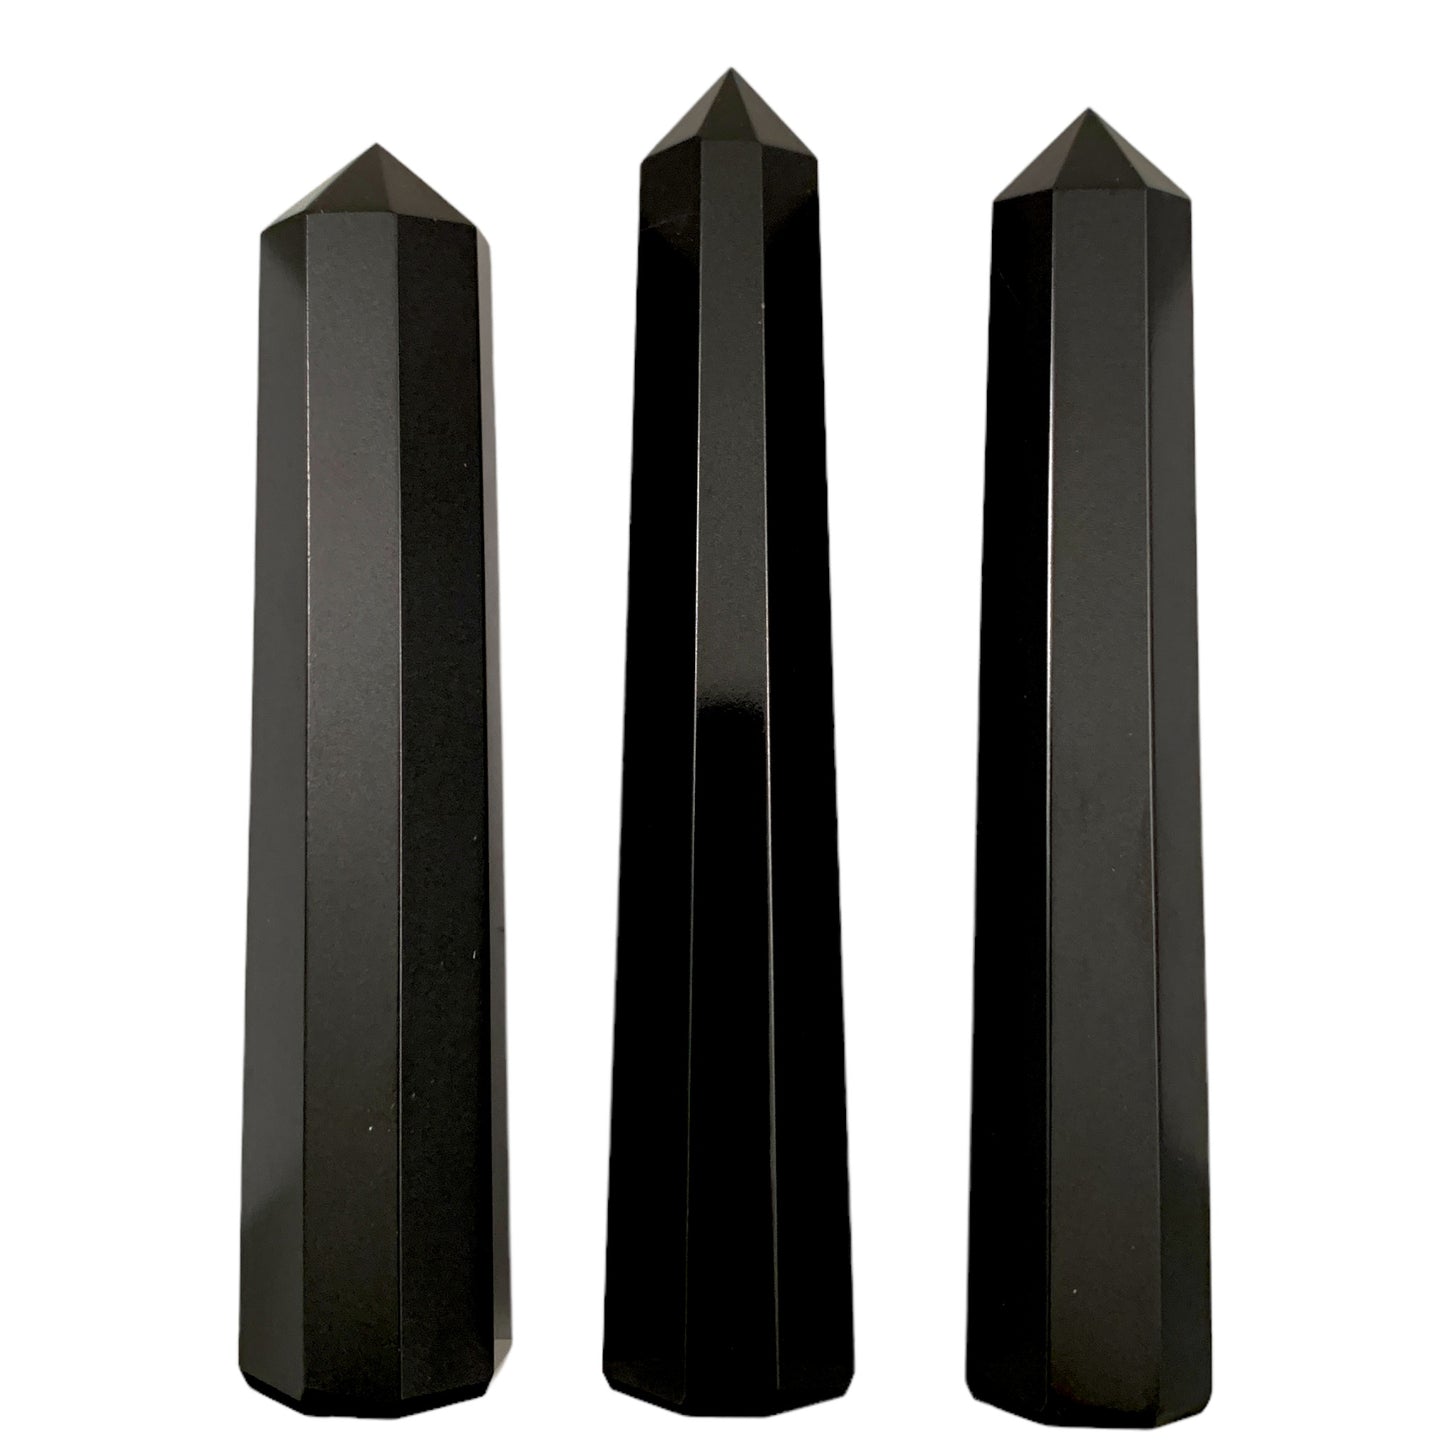 Black Jasper - Obelisk Polished Points - 3 to 6 inches - Price per gram per piece (B2B ordering 1 = 1 Tower so we charge Ex. 40g = $3.40 each)